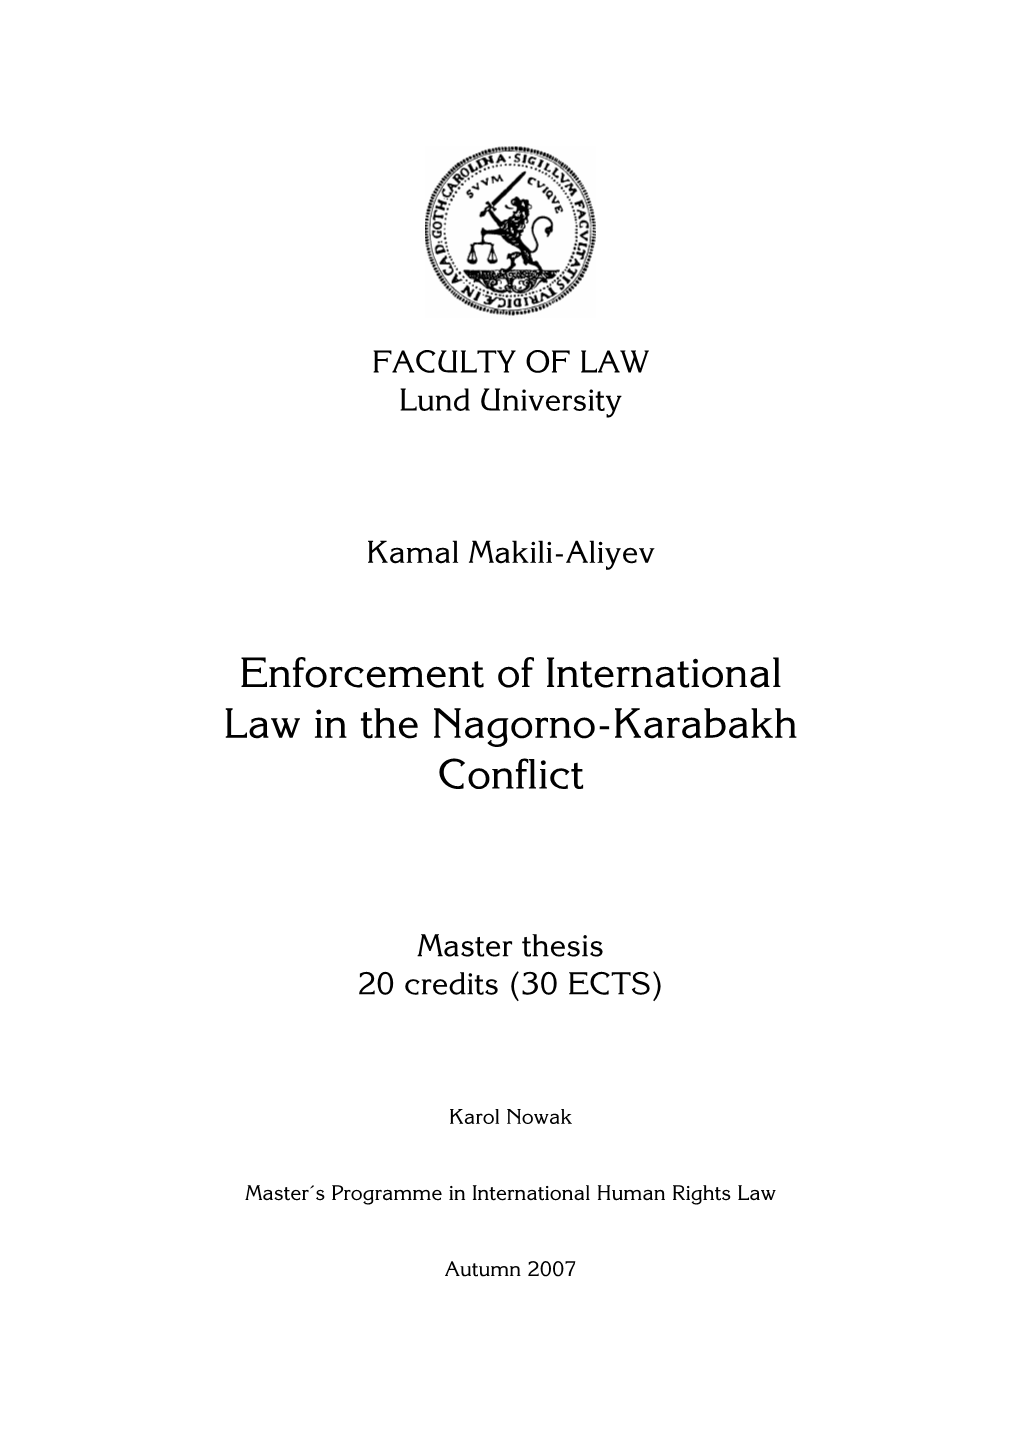 Enforcement of International Law in the Nagorno-Karabakh Conflict